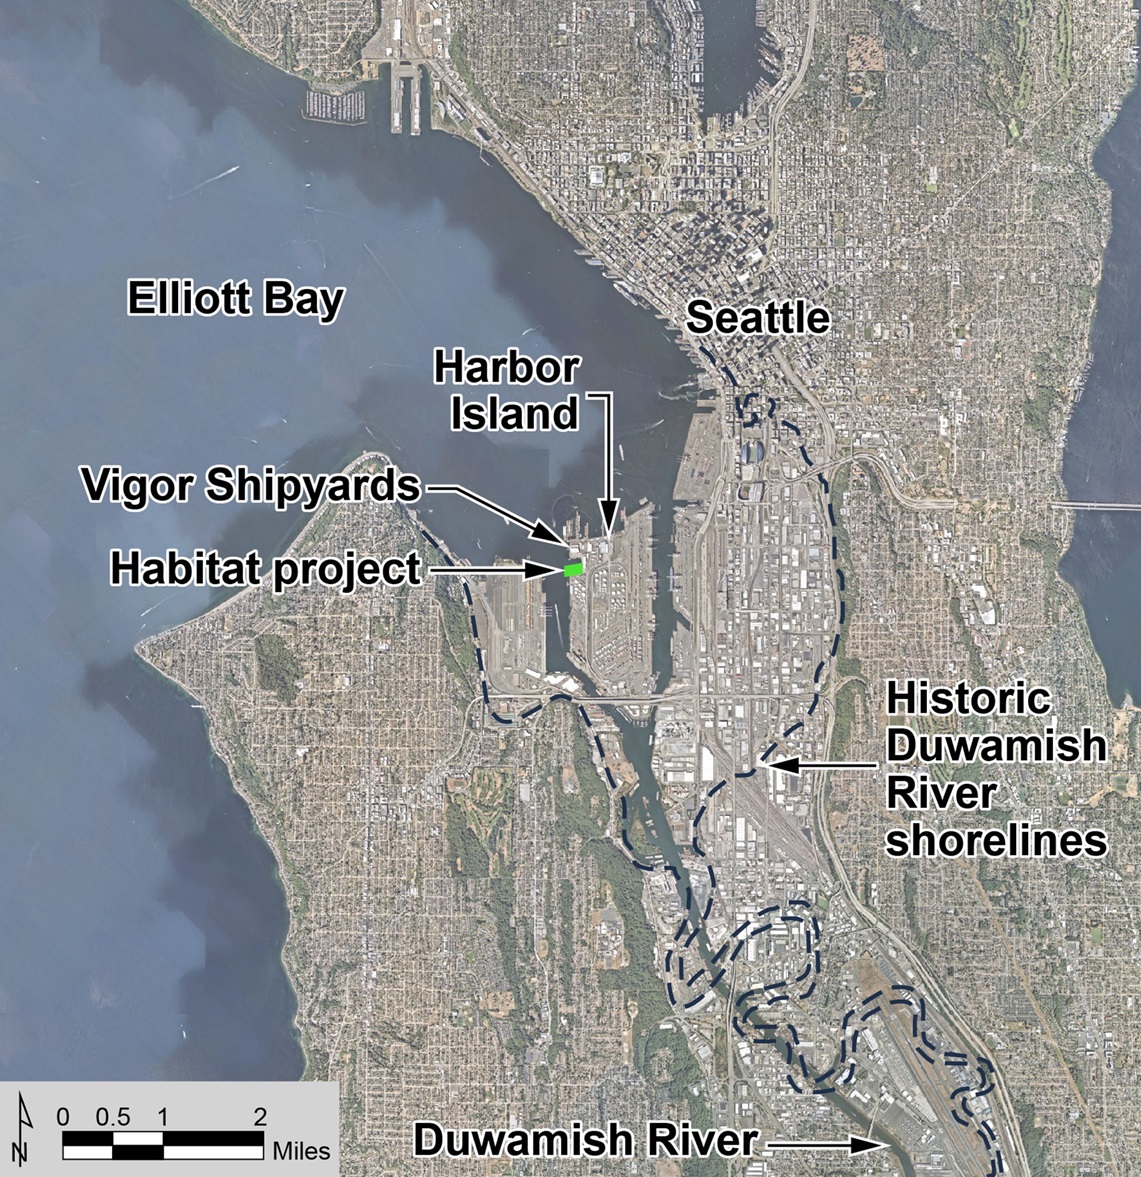 Vicinity map shows Elliot Bay, Harbor Island, and other sites near an industrial shipyard in Seattle. 